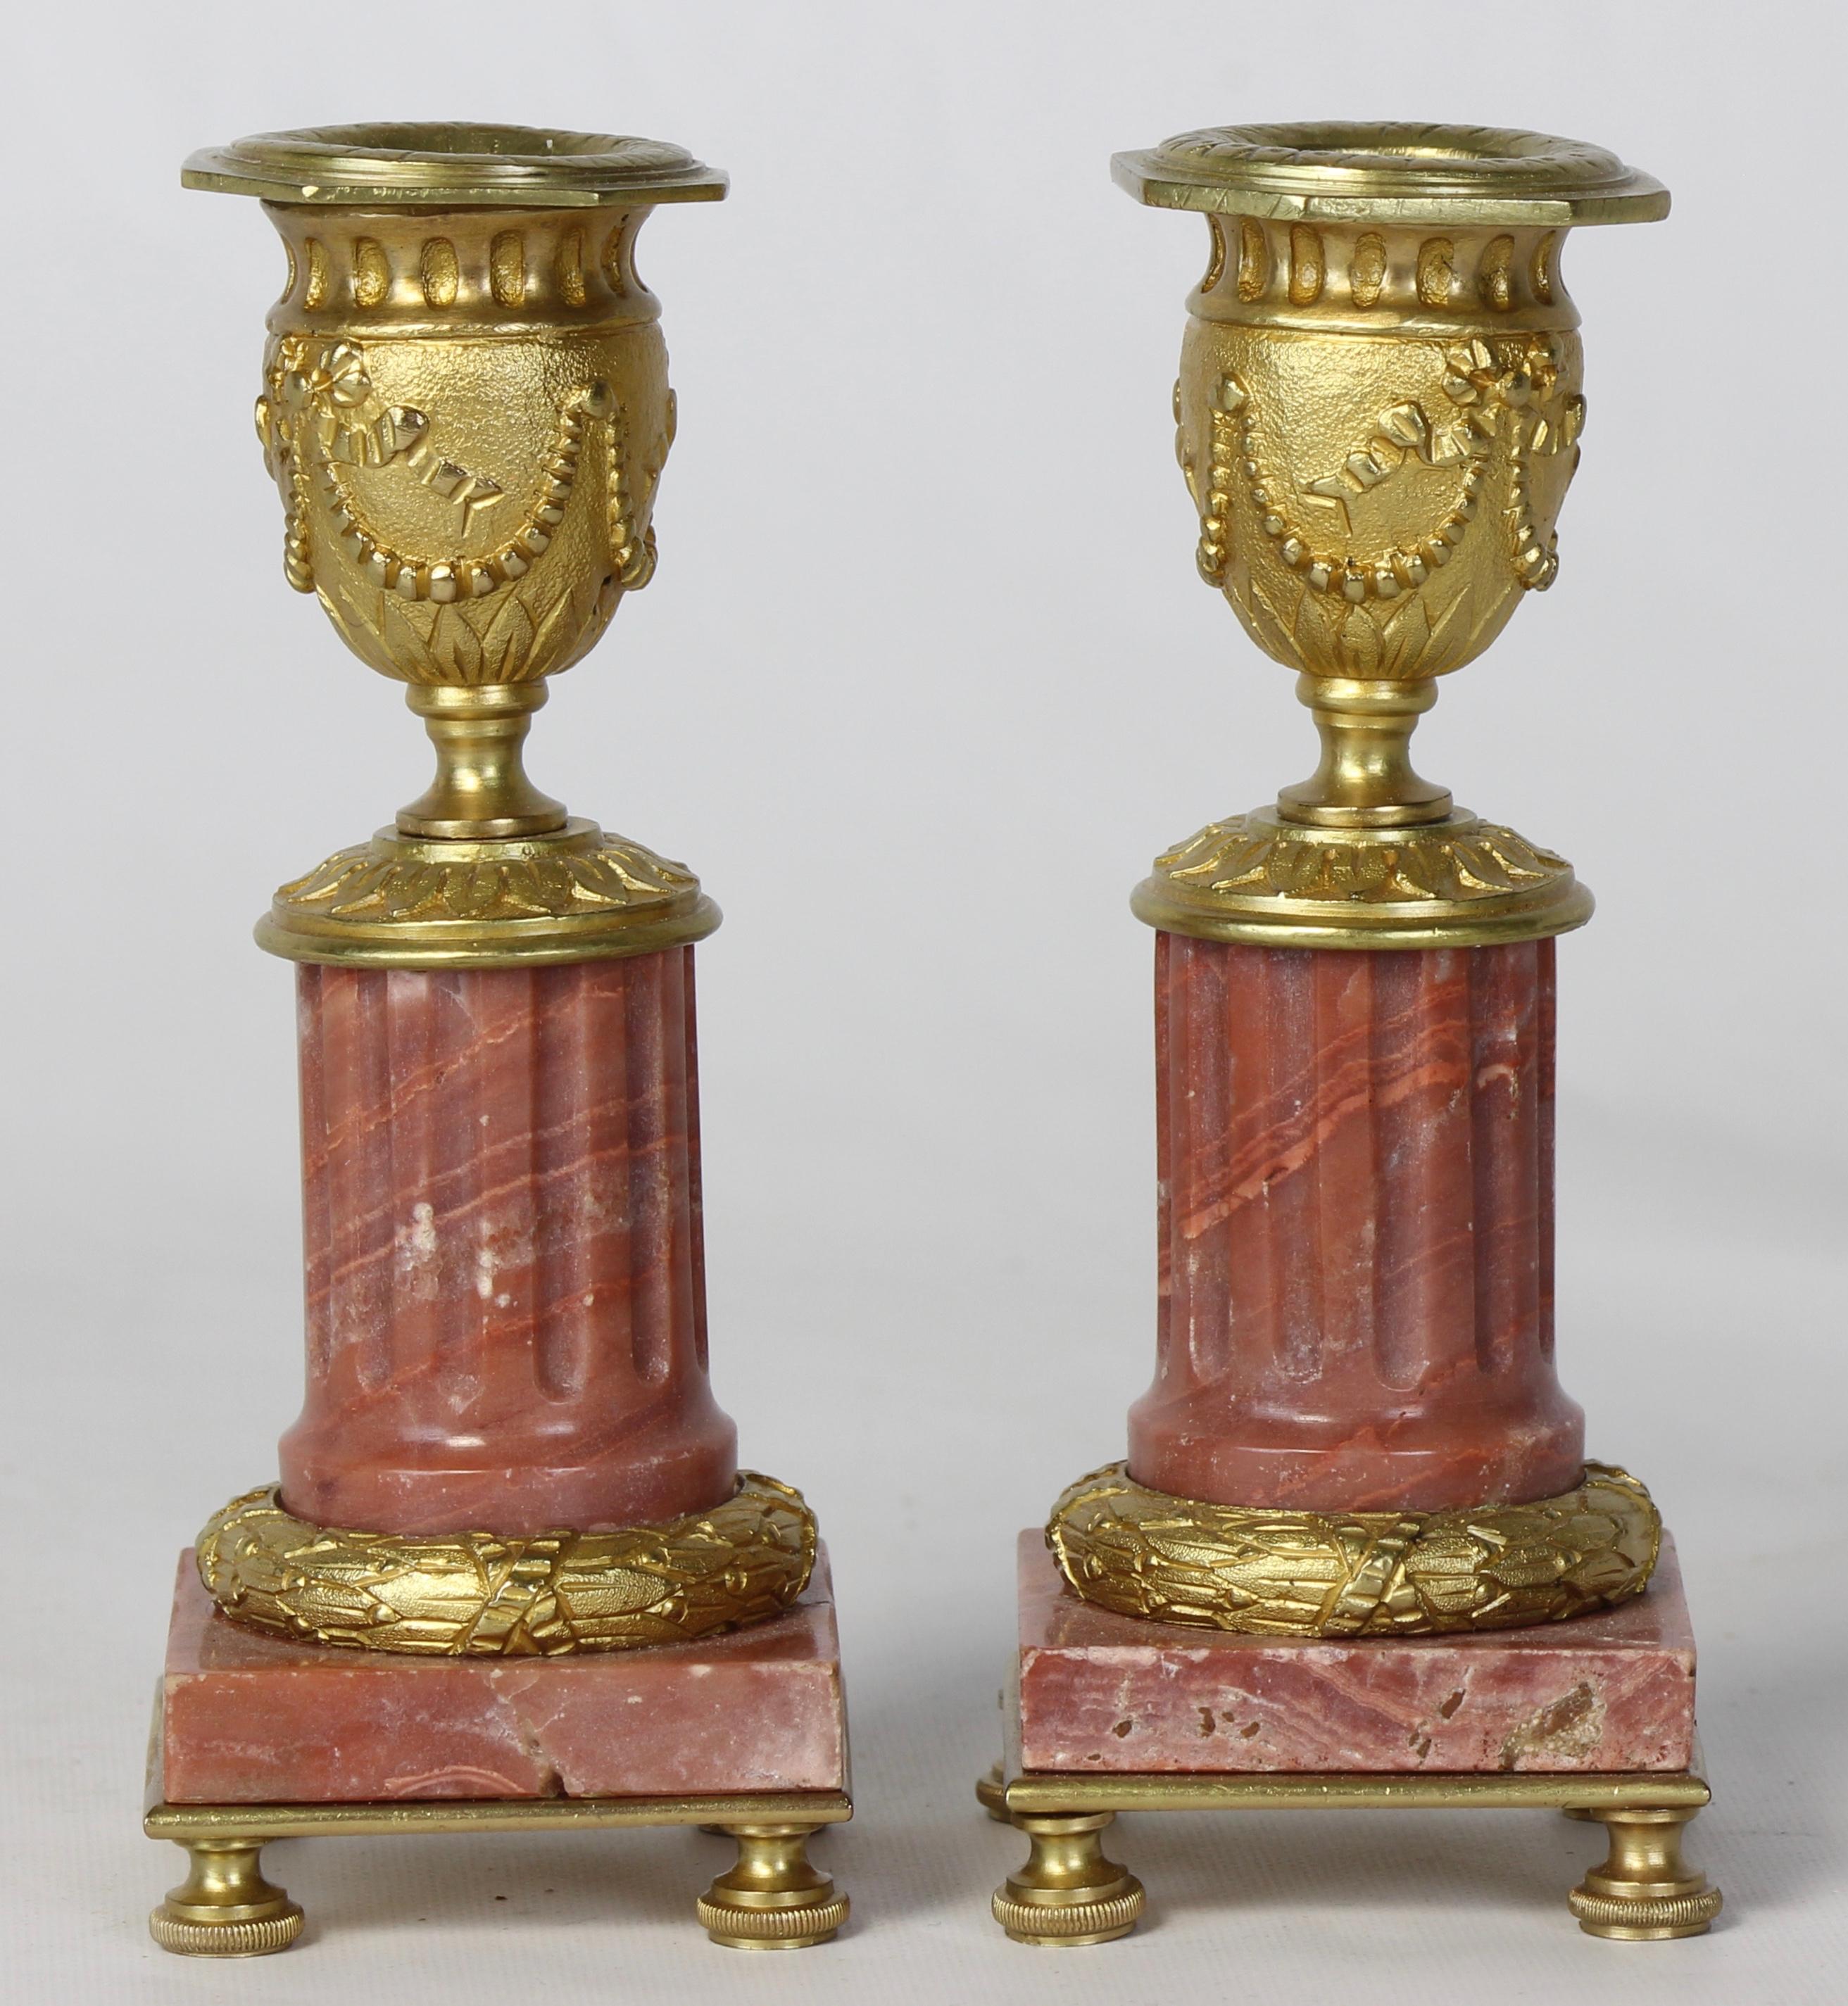 A pair of early 20th century French small scale gilt bronze and rose marble neoclassical style candlesticks in the form of fluted columns supporting classical urns.